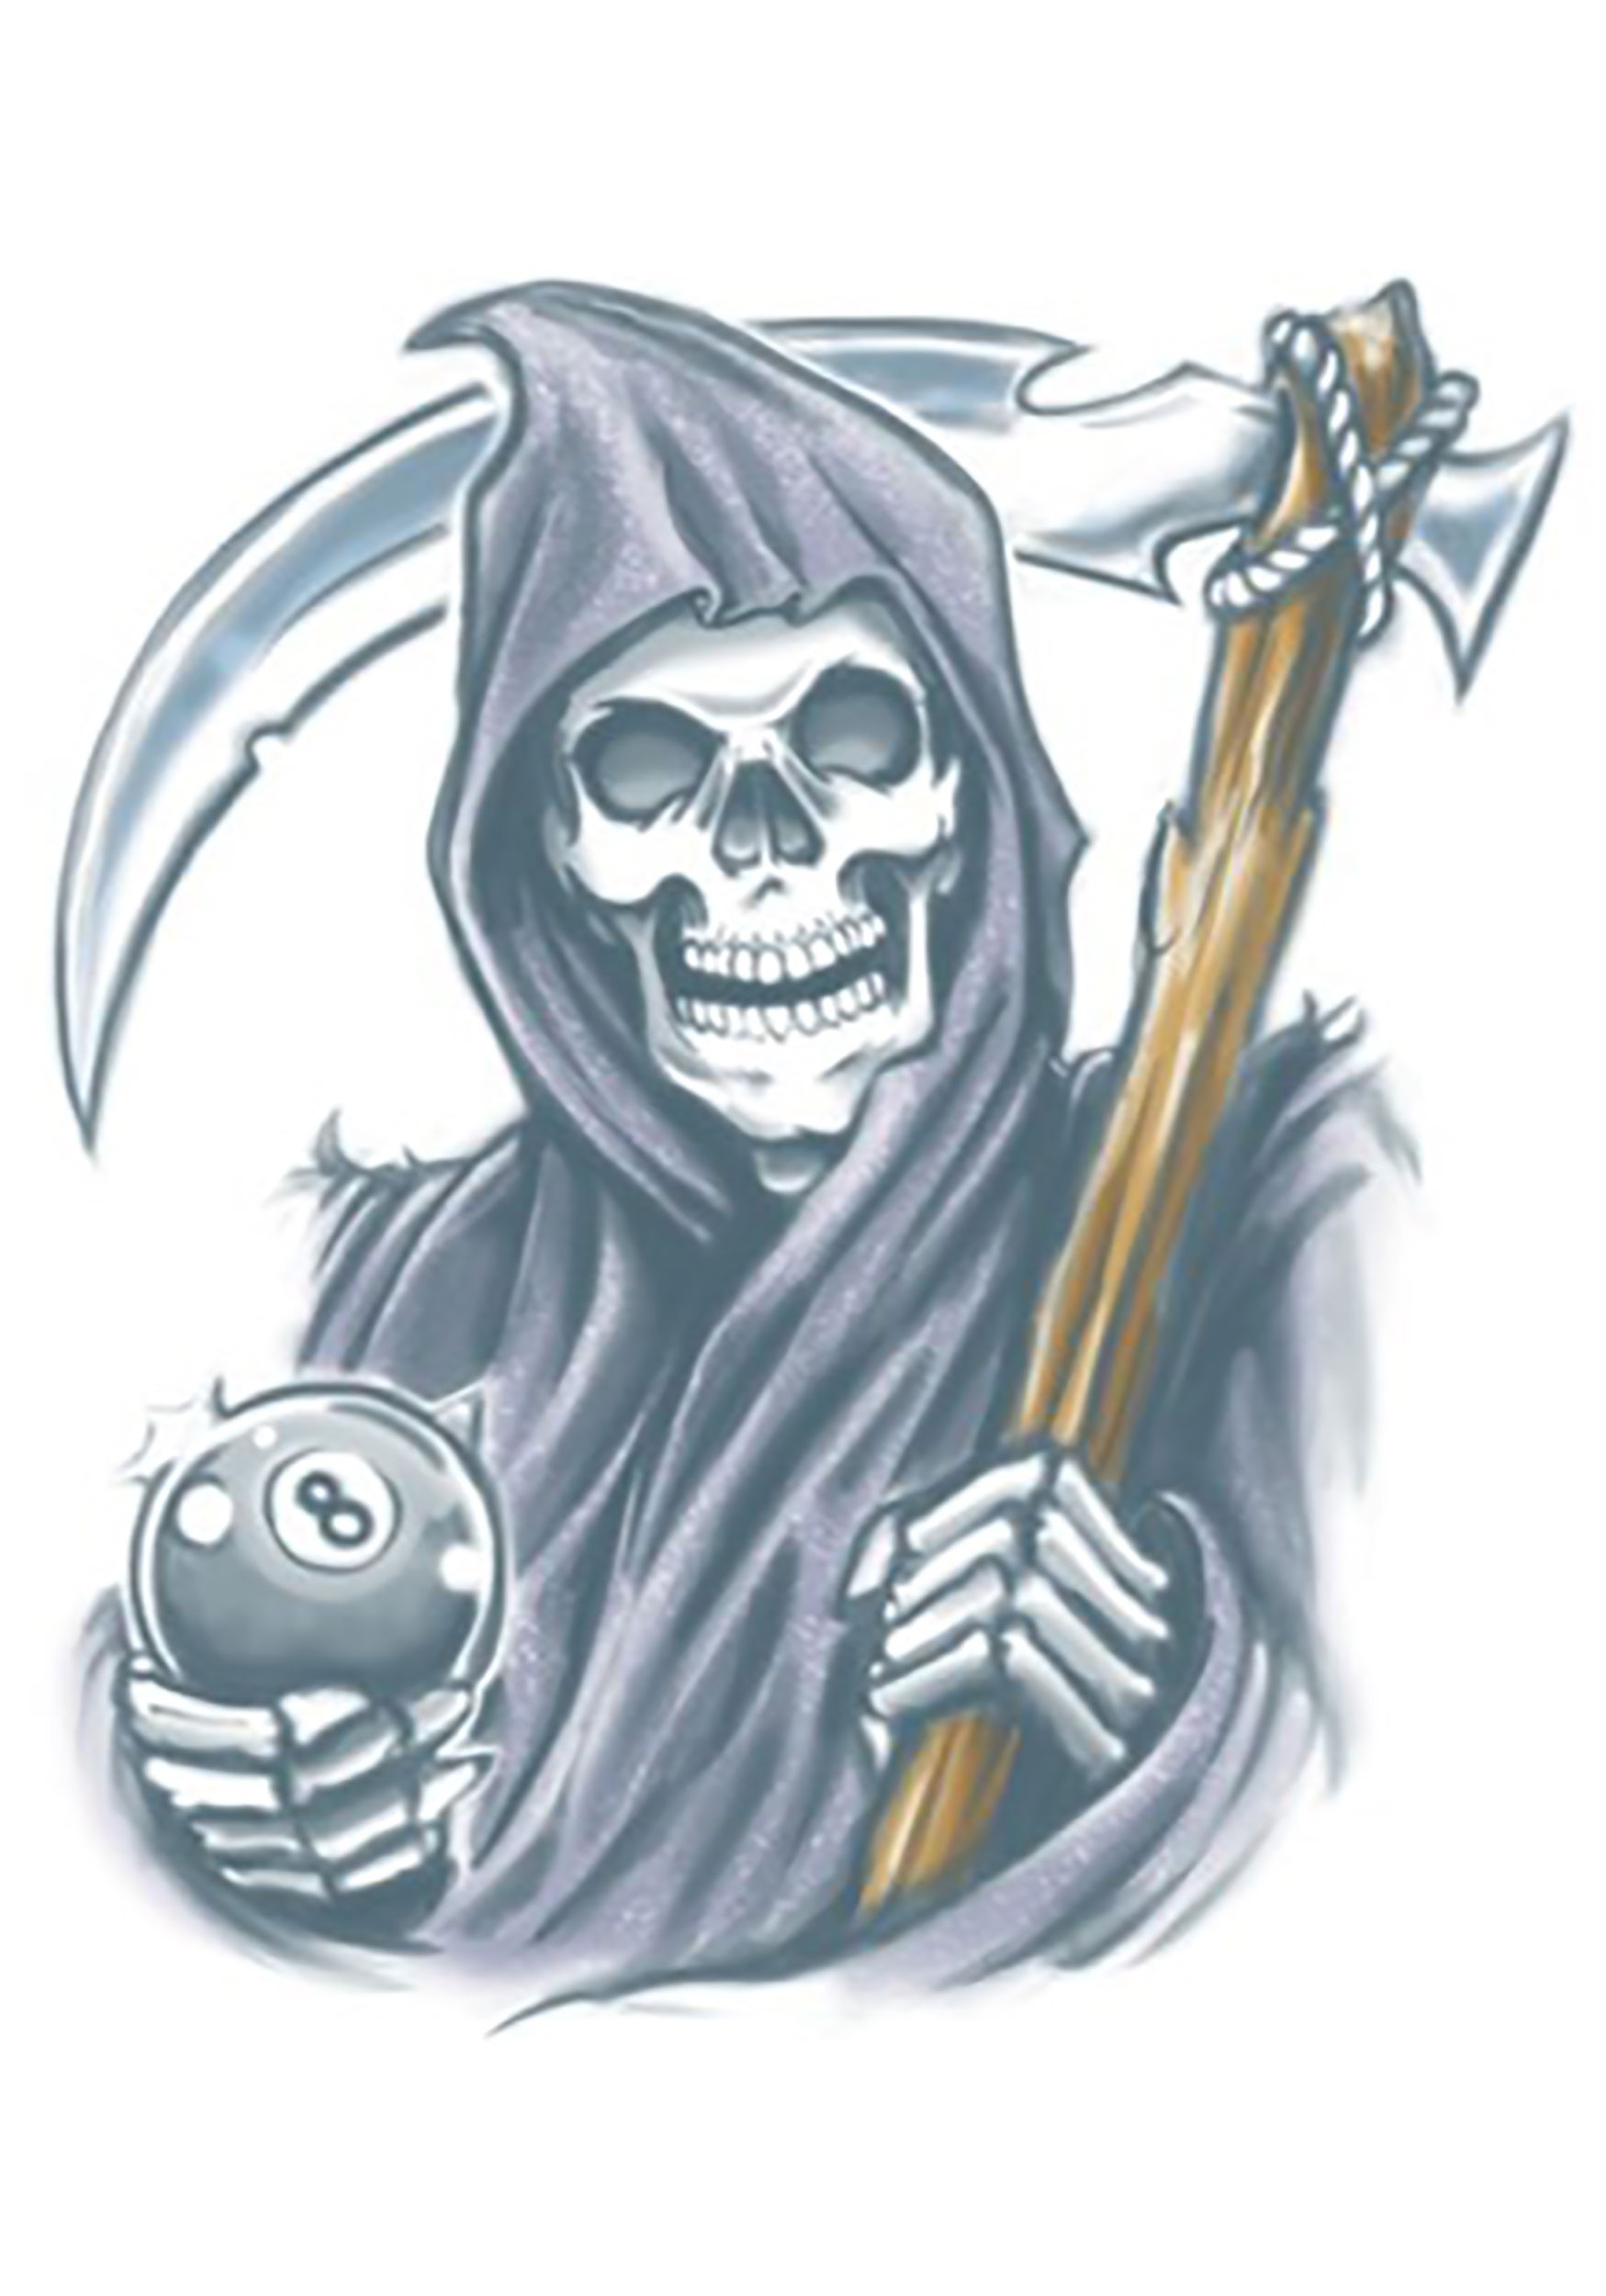 Grim reaper emblem in traditional tattoo style 17015495 Vector Art at  Vecteezy